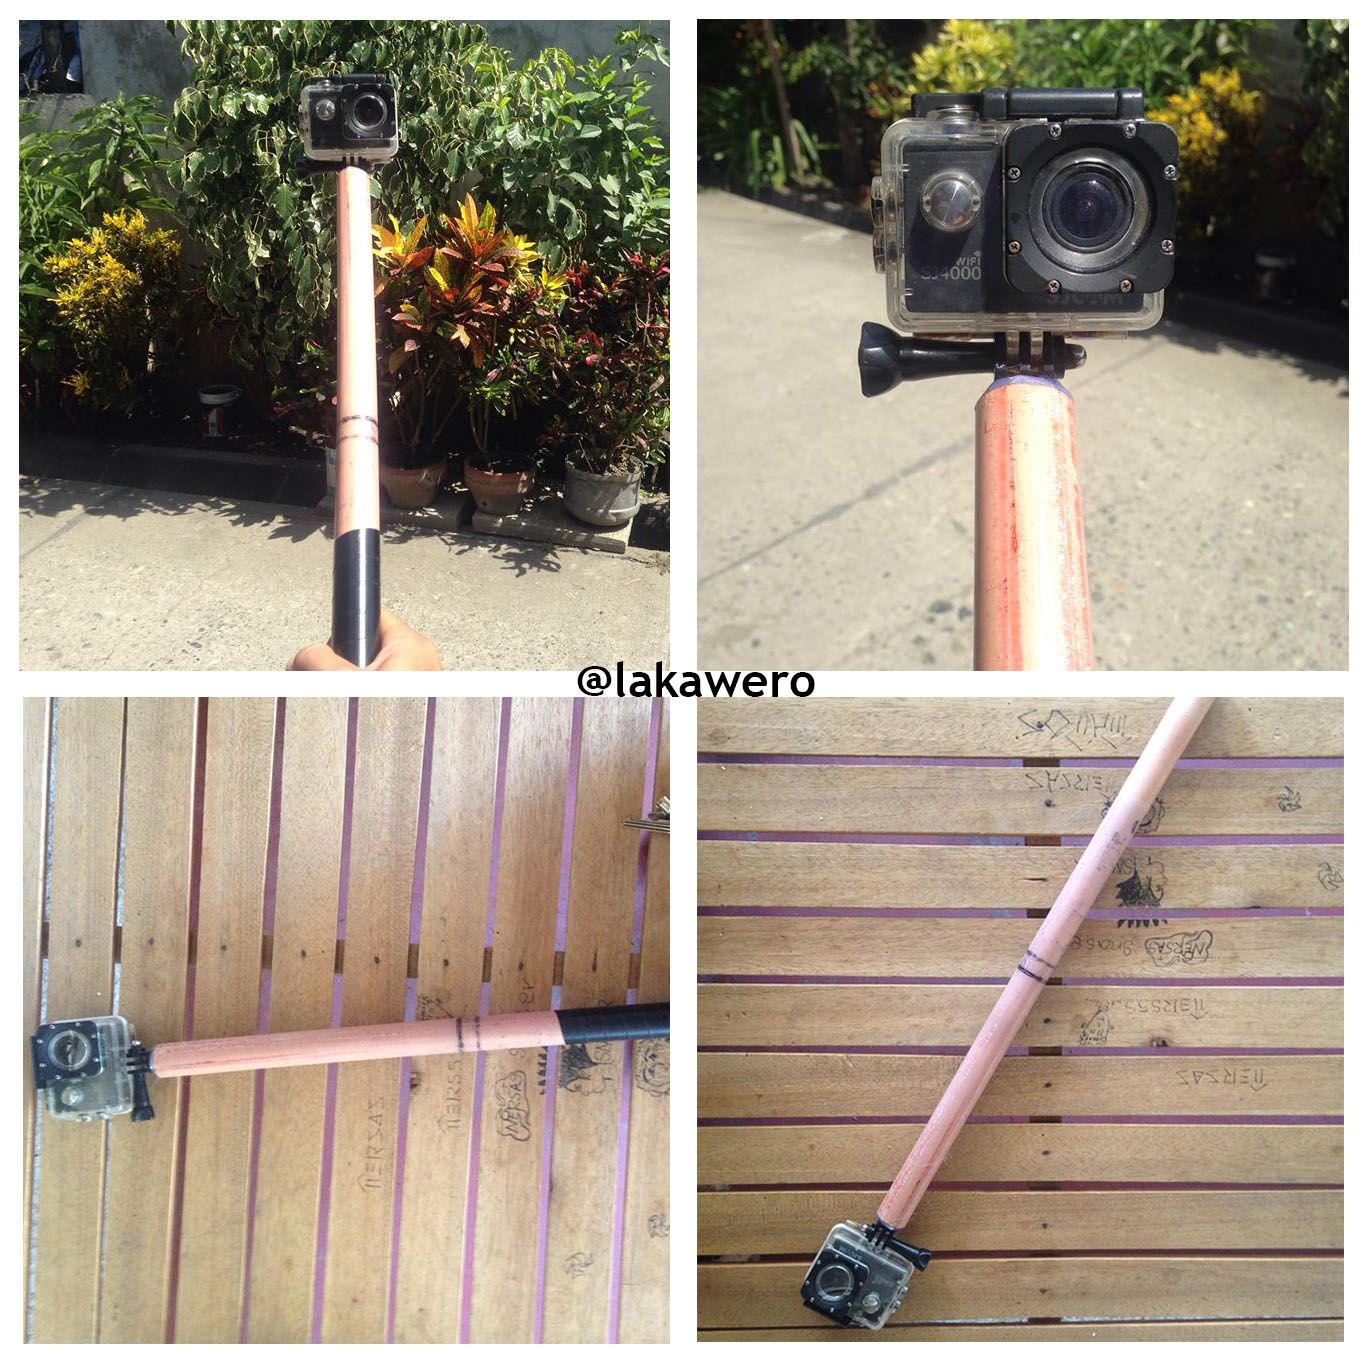 STEEMGIGS: How To: (DIY) FLOATING SELFIE STICK / BOBBER FOR ACTION